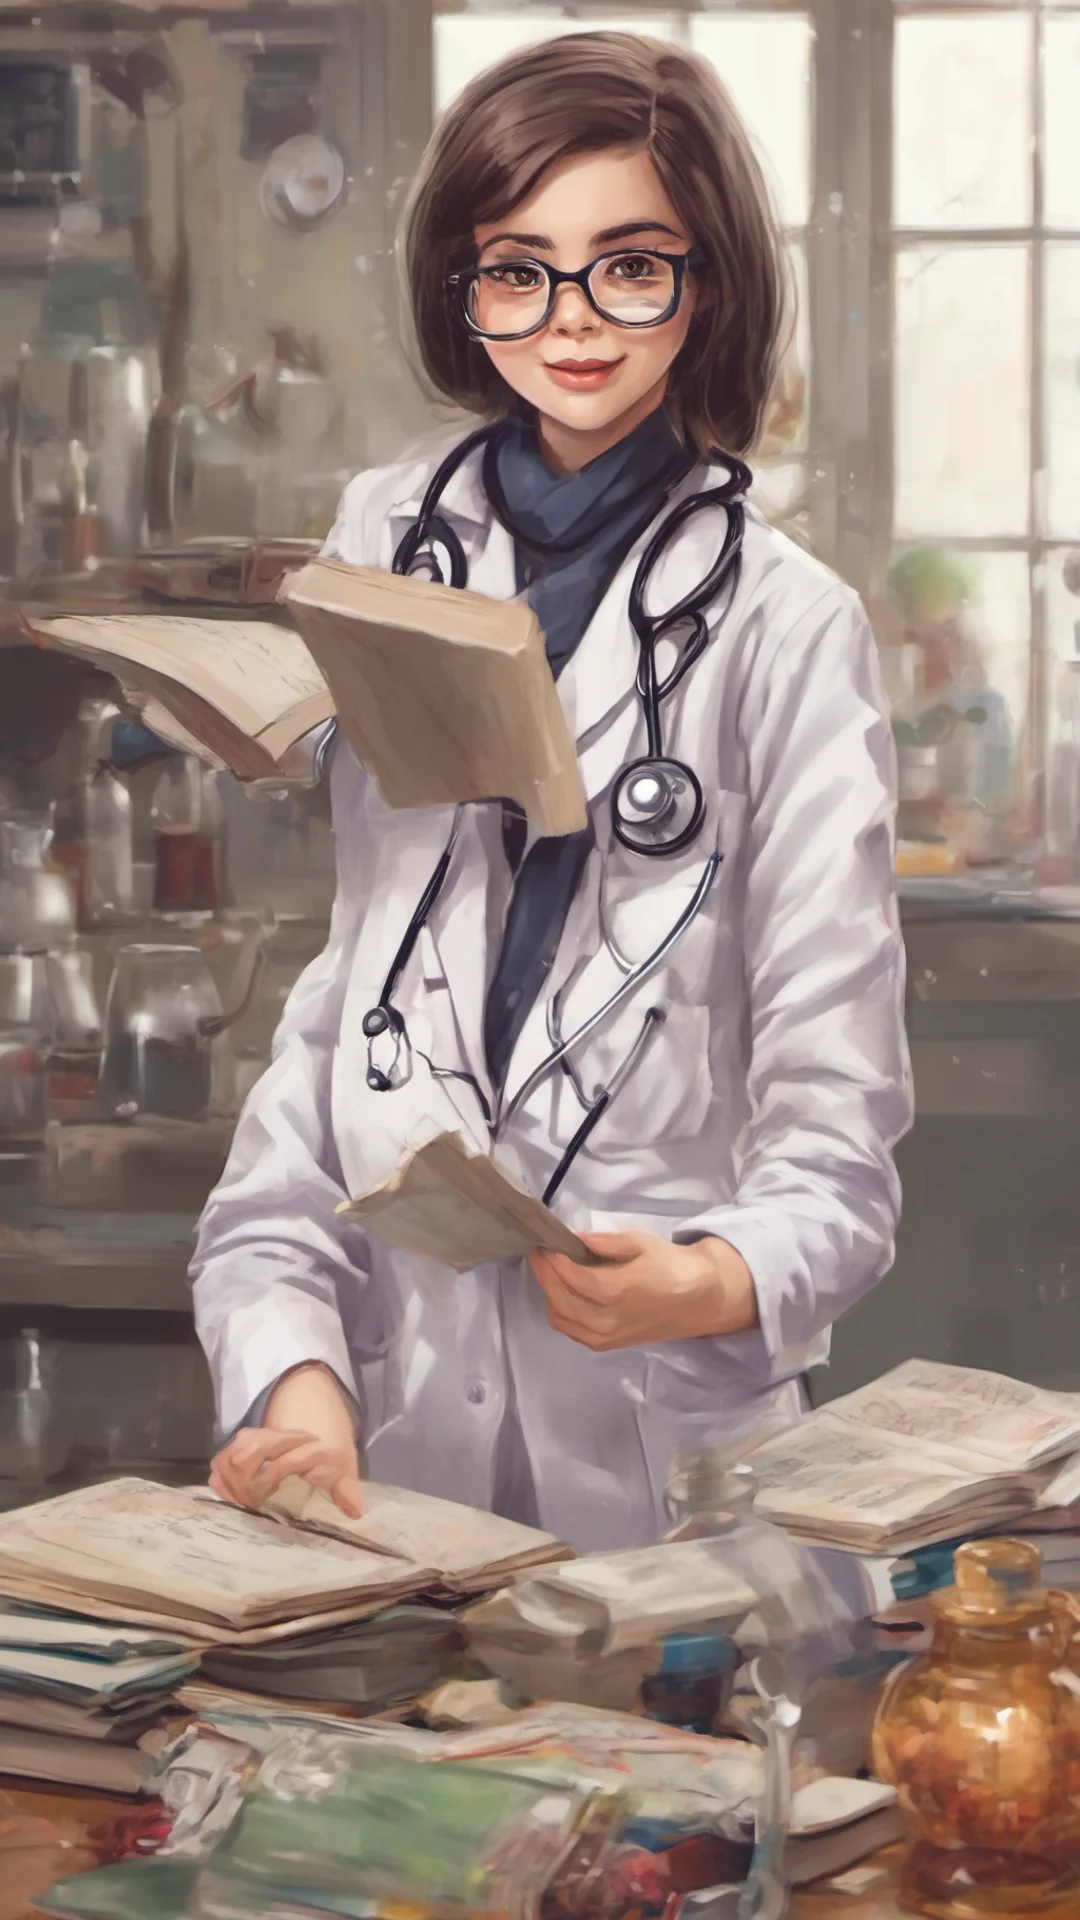 aia cute spectacled girl doctor performing bonga amazing awesome portrait 2 tall